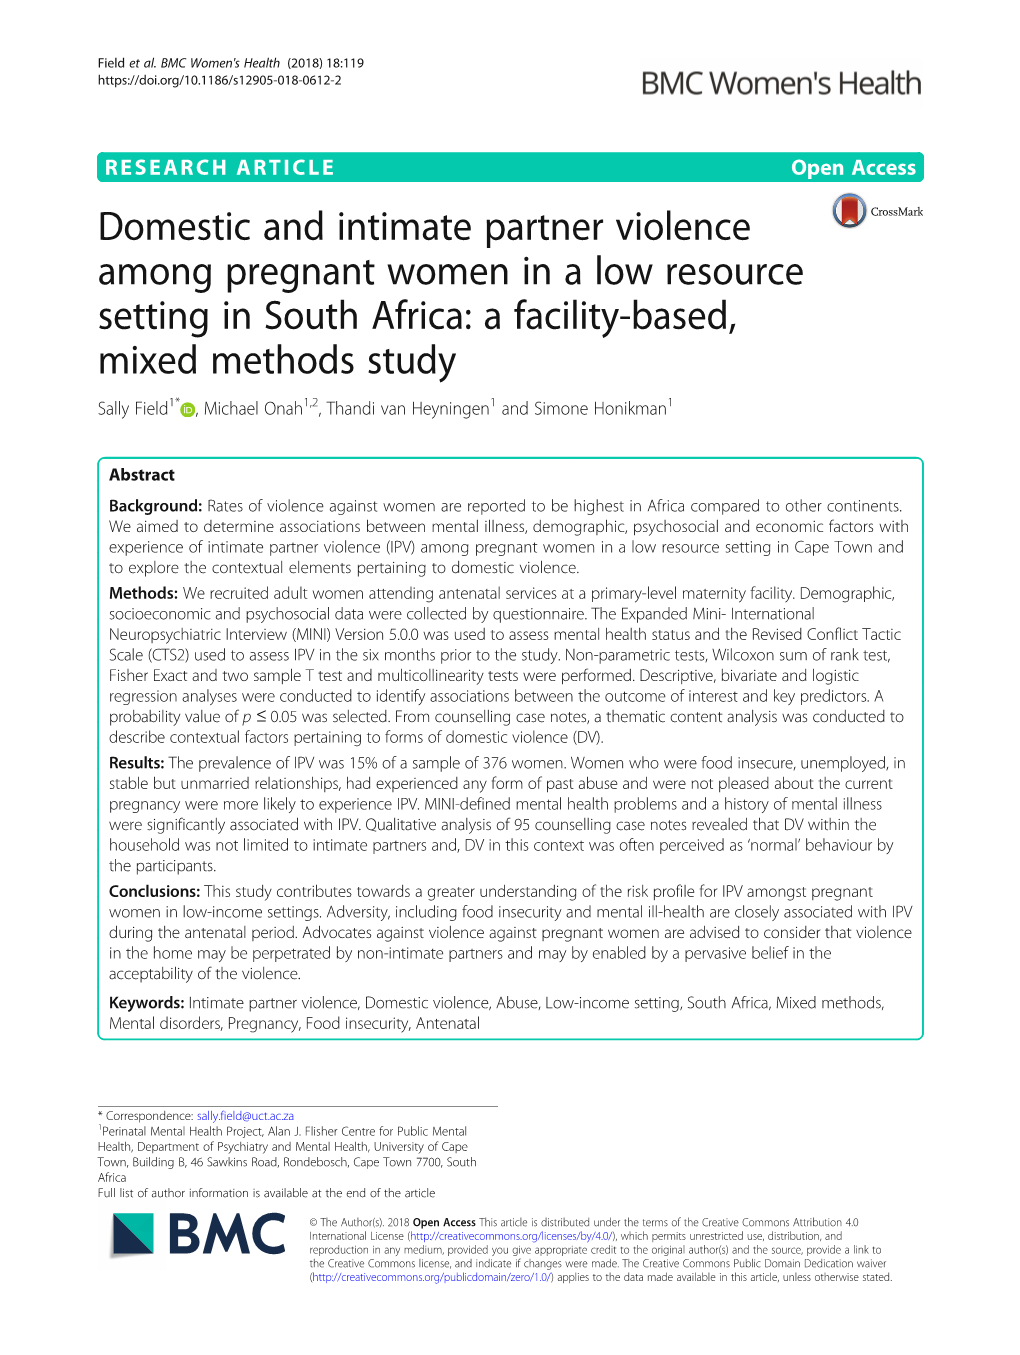 Domestic and Intimate Partner Violence Among Pregnant Women In